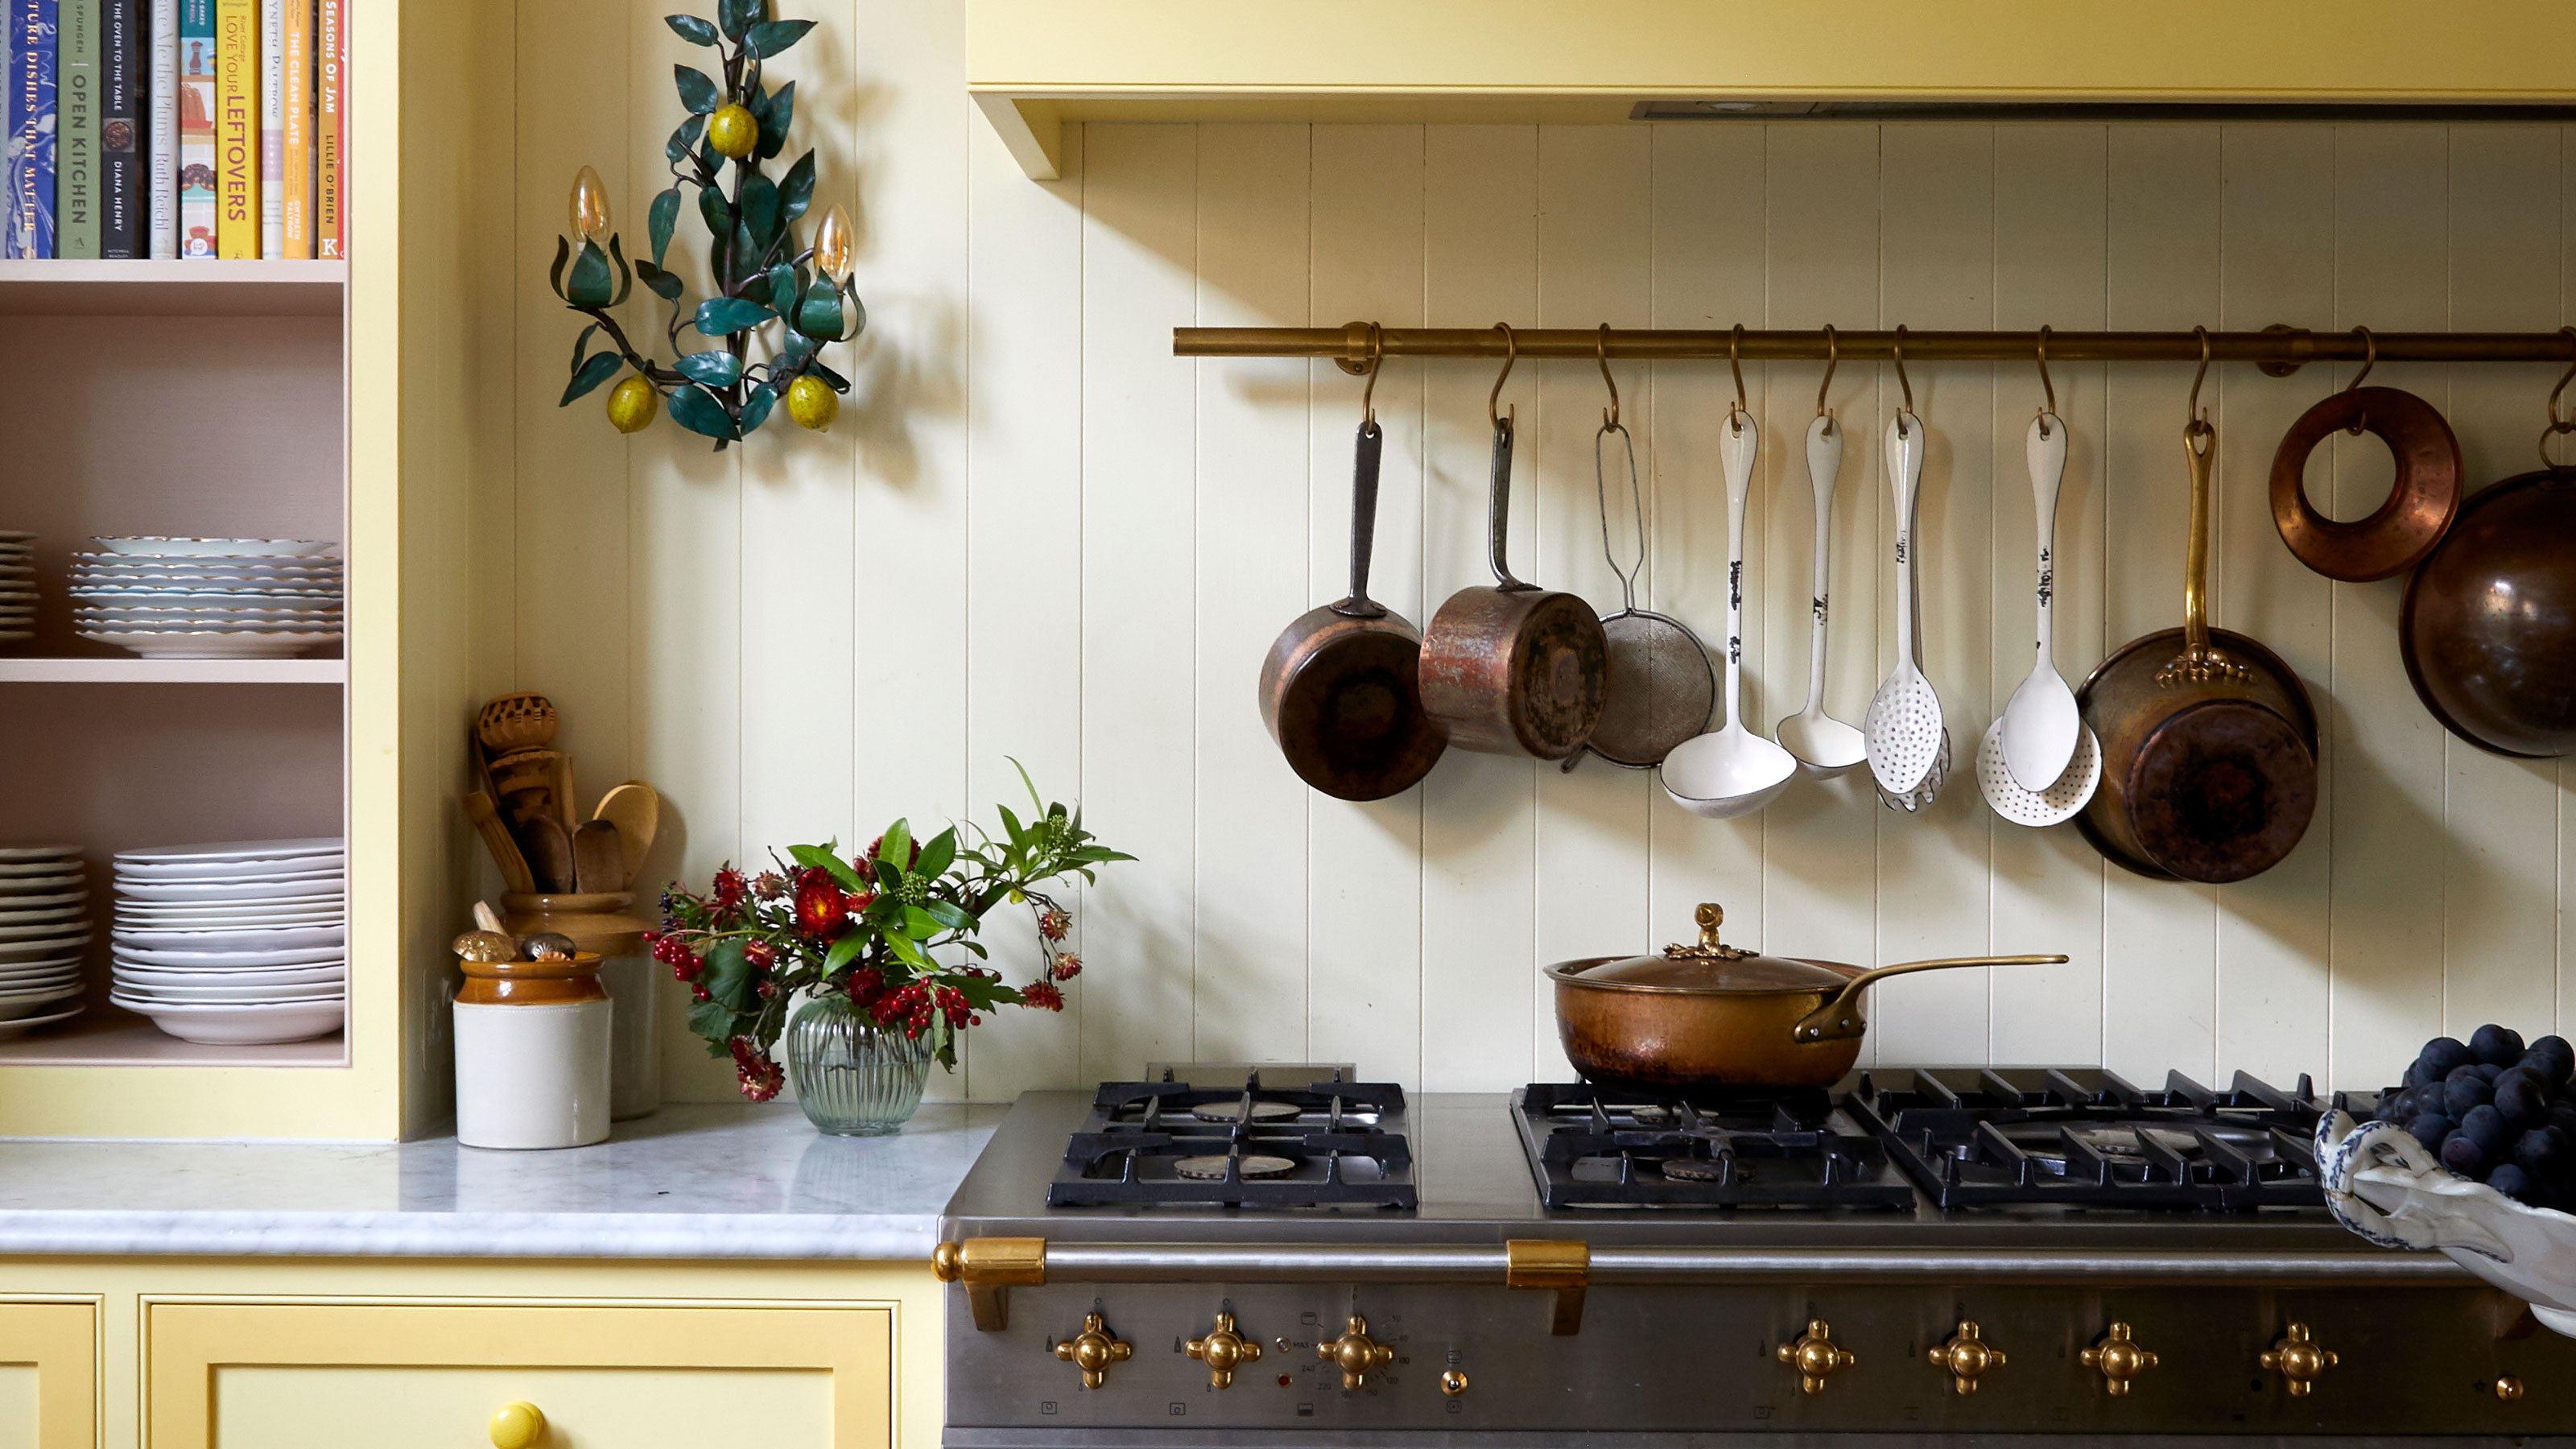 How to Organize Pots and Pans - Smart Ways to Organize Cooking Tools